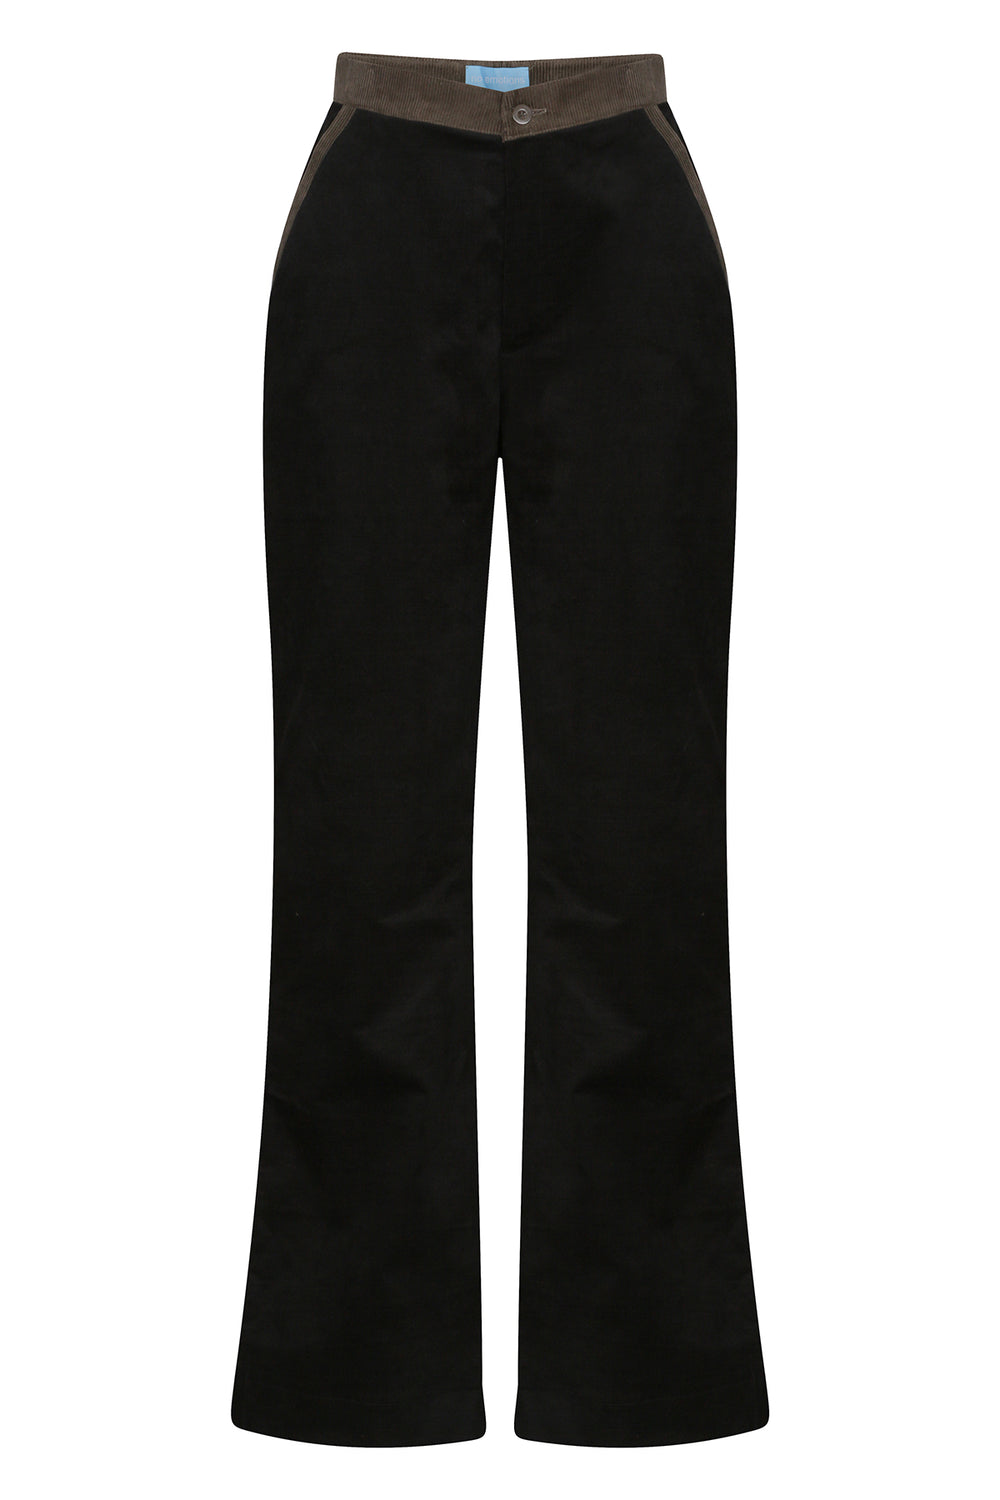 Black Cord Trousers - noemotions-store